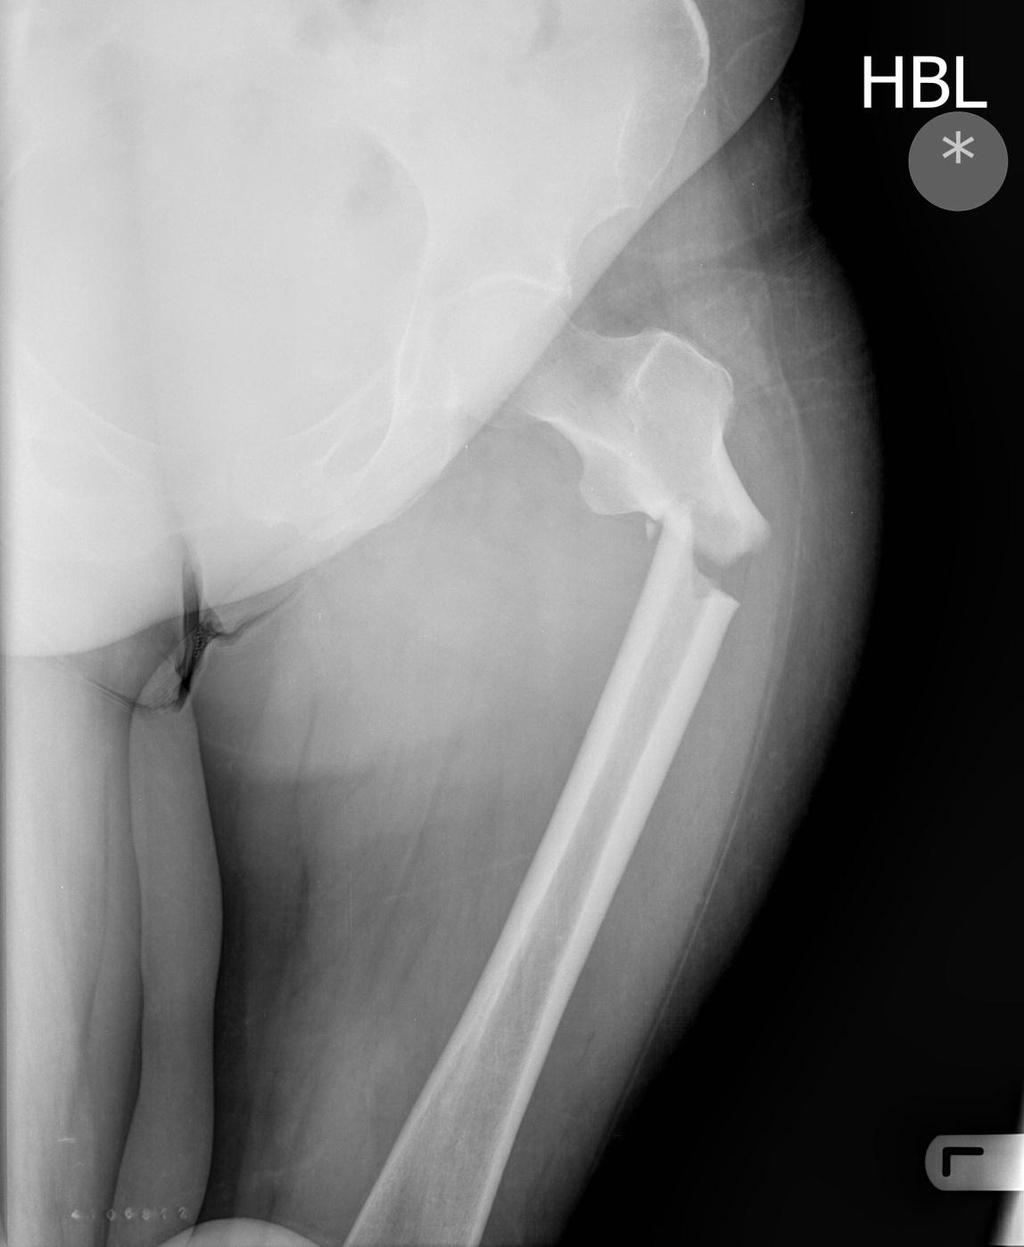 Atypical femoral fractures 57 y/o